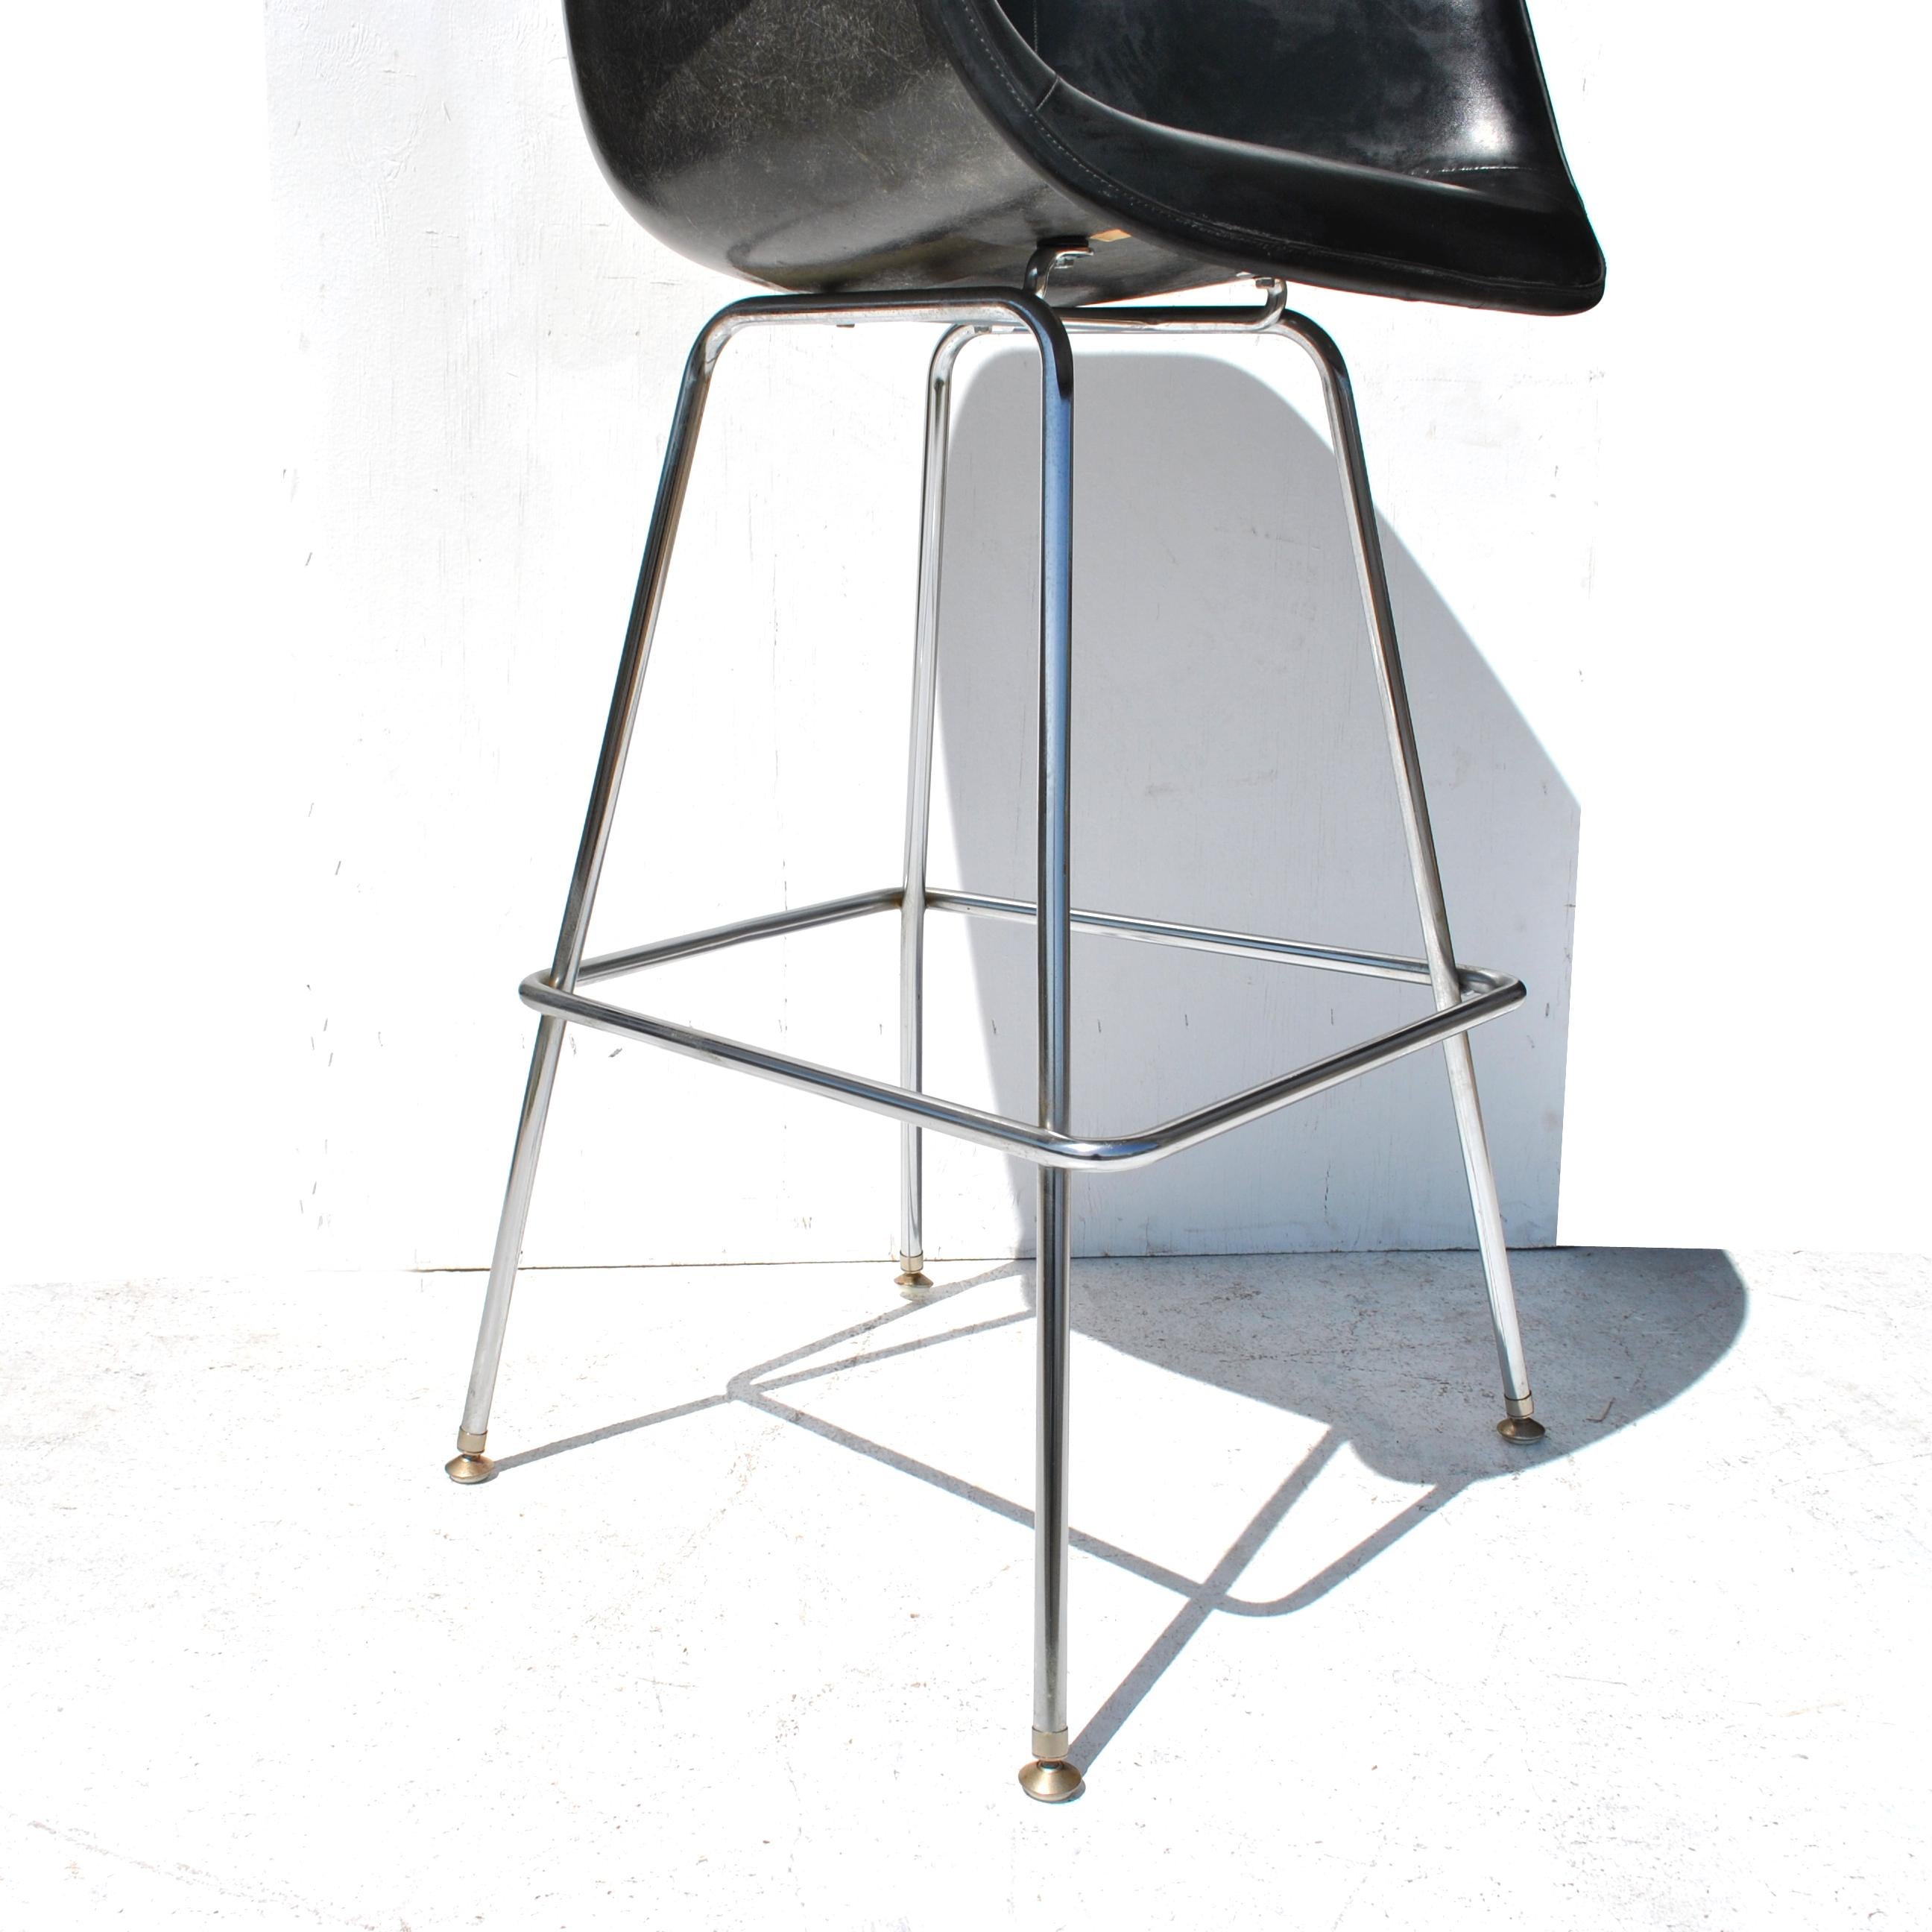 1 Midcentury H Miller Eames Fiberglass Stool with H-Base In Good Condition For Sale In Pasadena, TX